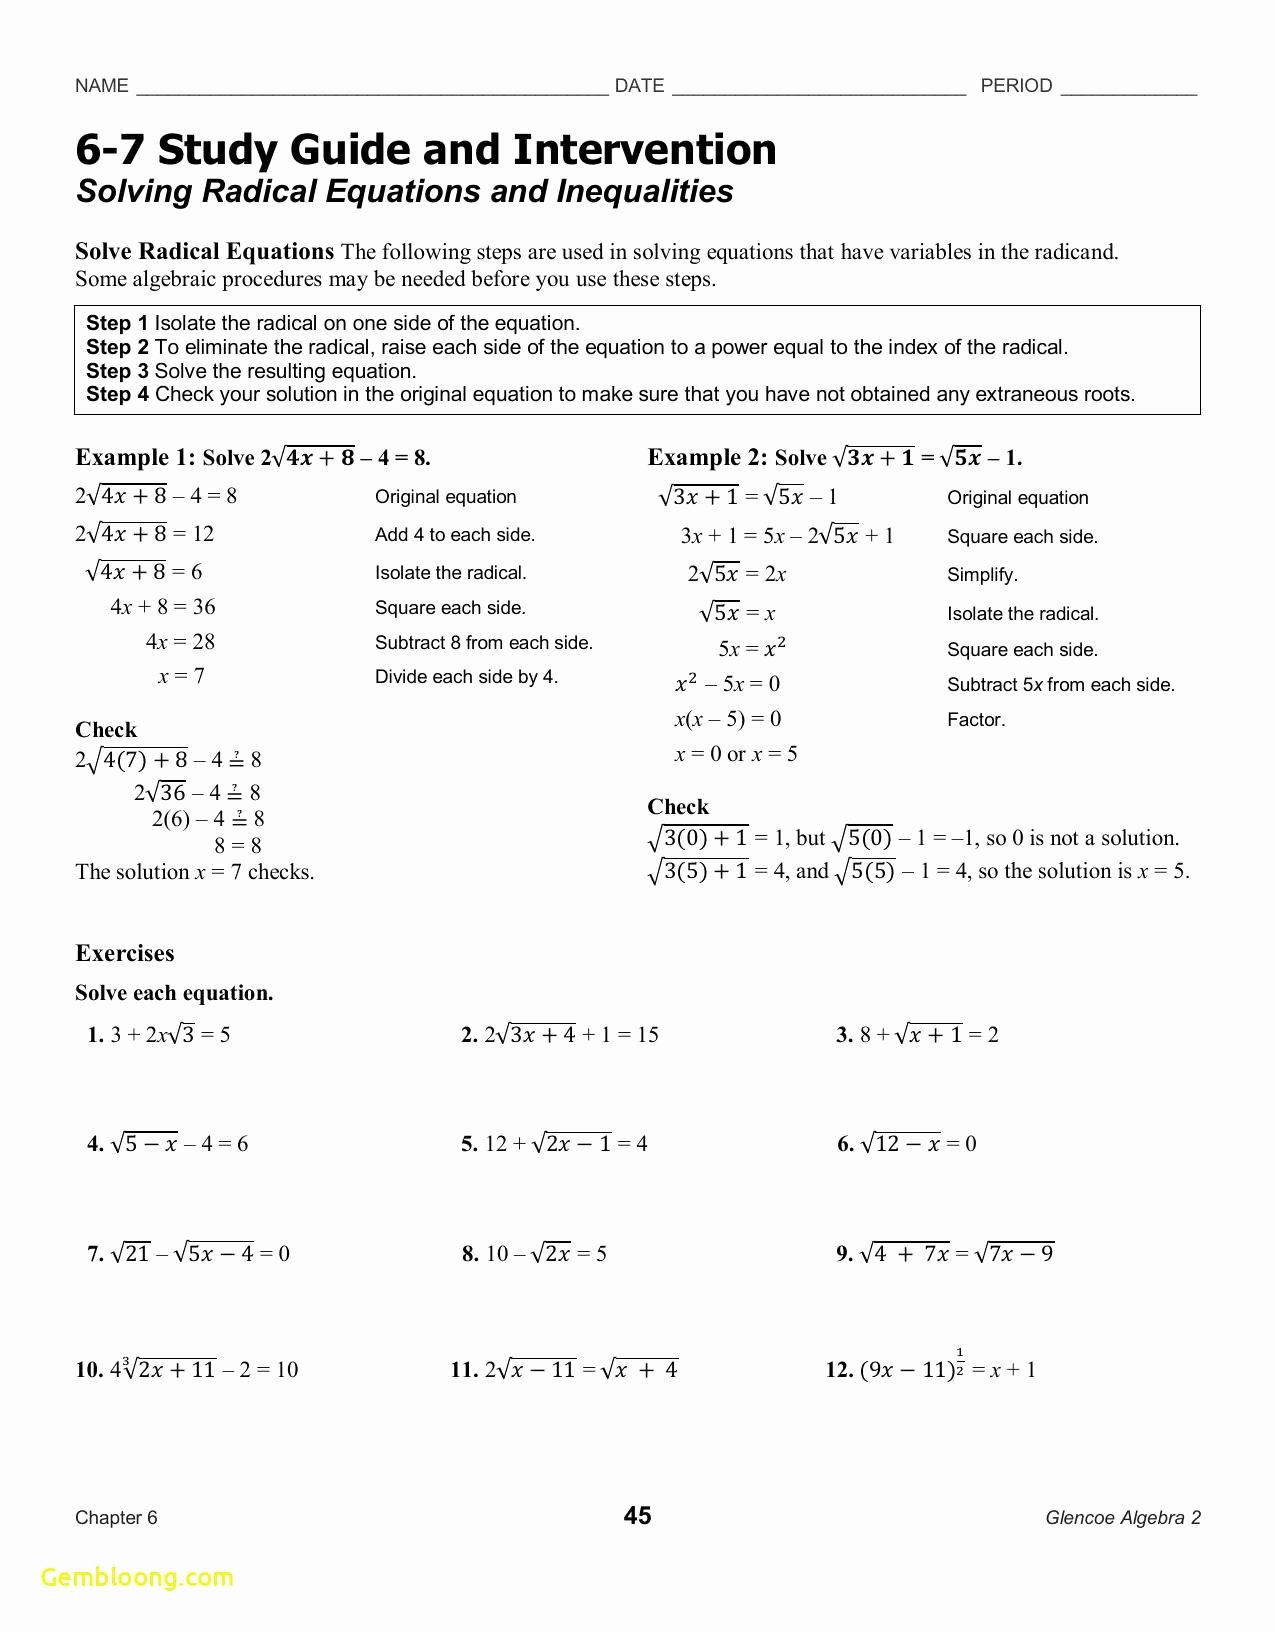 Simplifying Radicals Worksheet with Answers New Simplifying Radicals Worksheet Answers Cramerforcongress